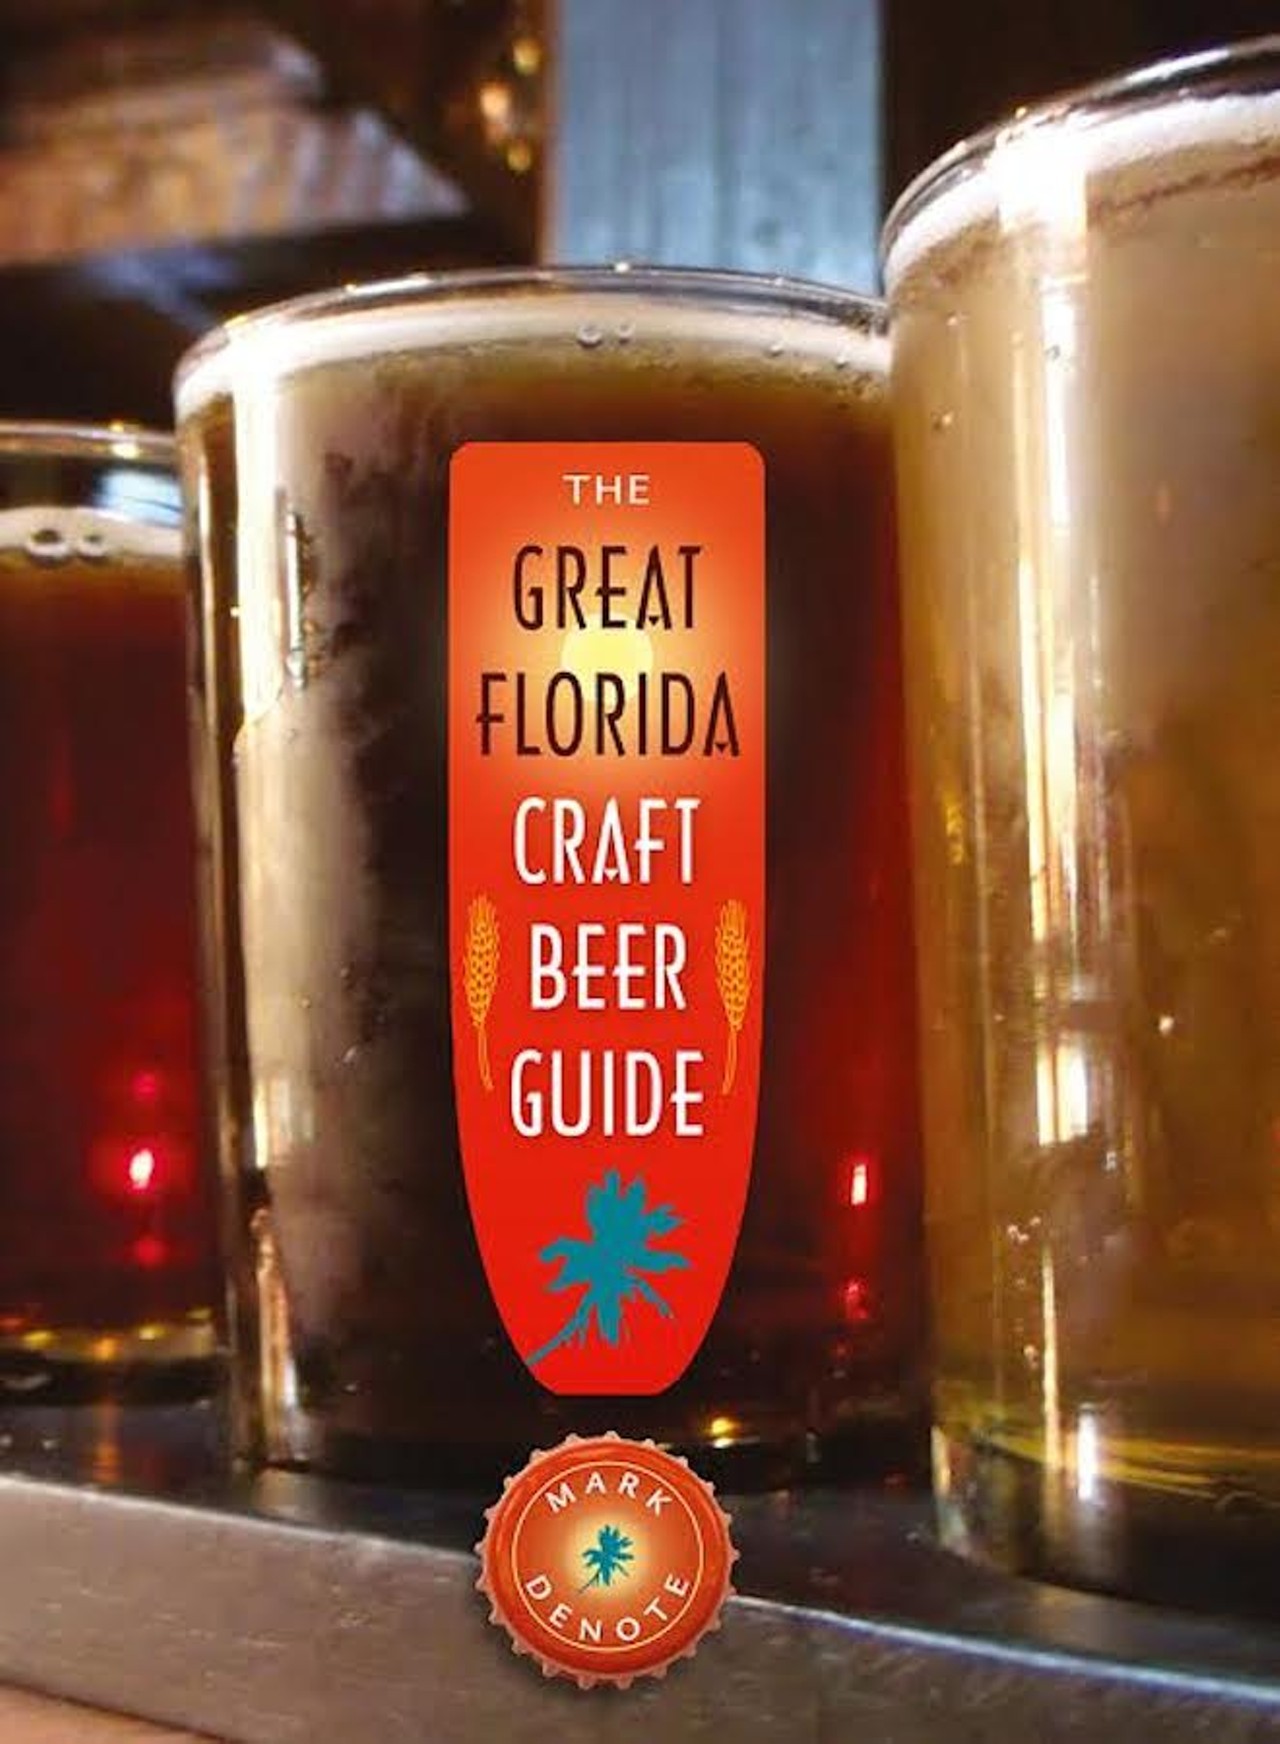 Saturday, Dec. 13The Great Florida Craft Beer Guide Book SigningAuthor Mark DeNote discusses Florida's breweries and the craft brewing industry